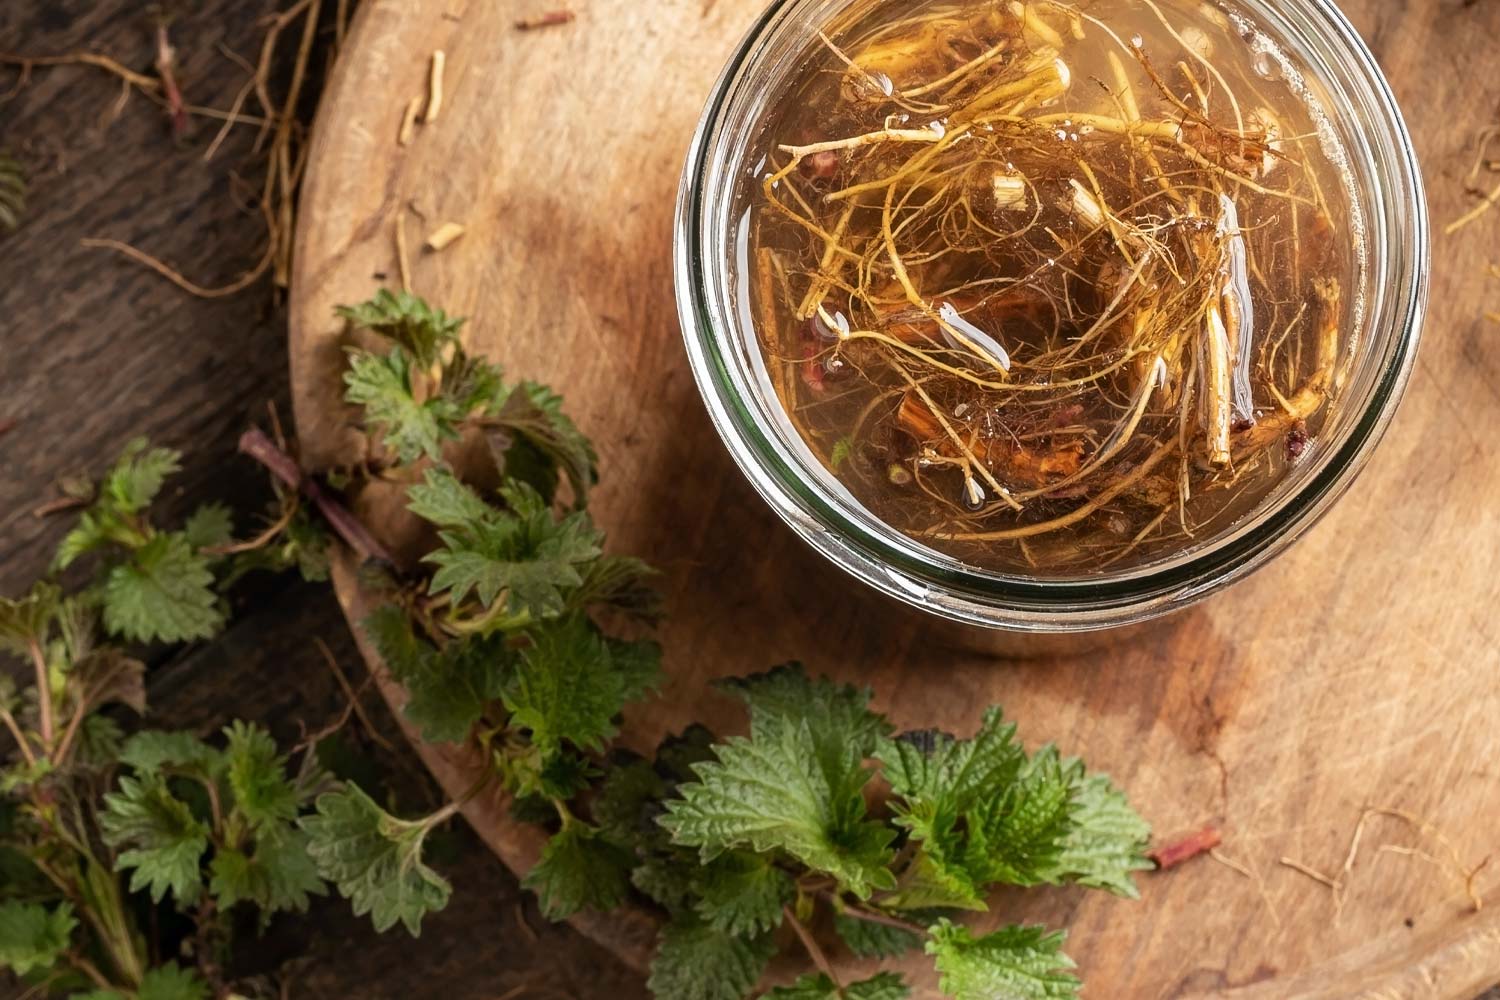 Nettle root tincture for immune support